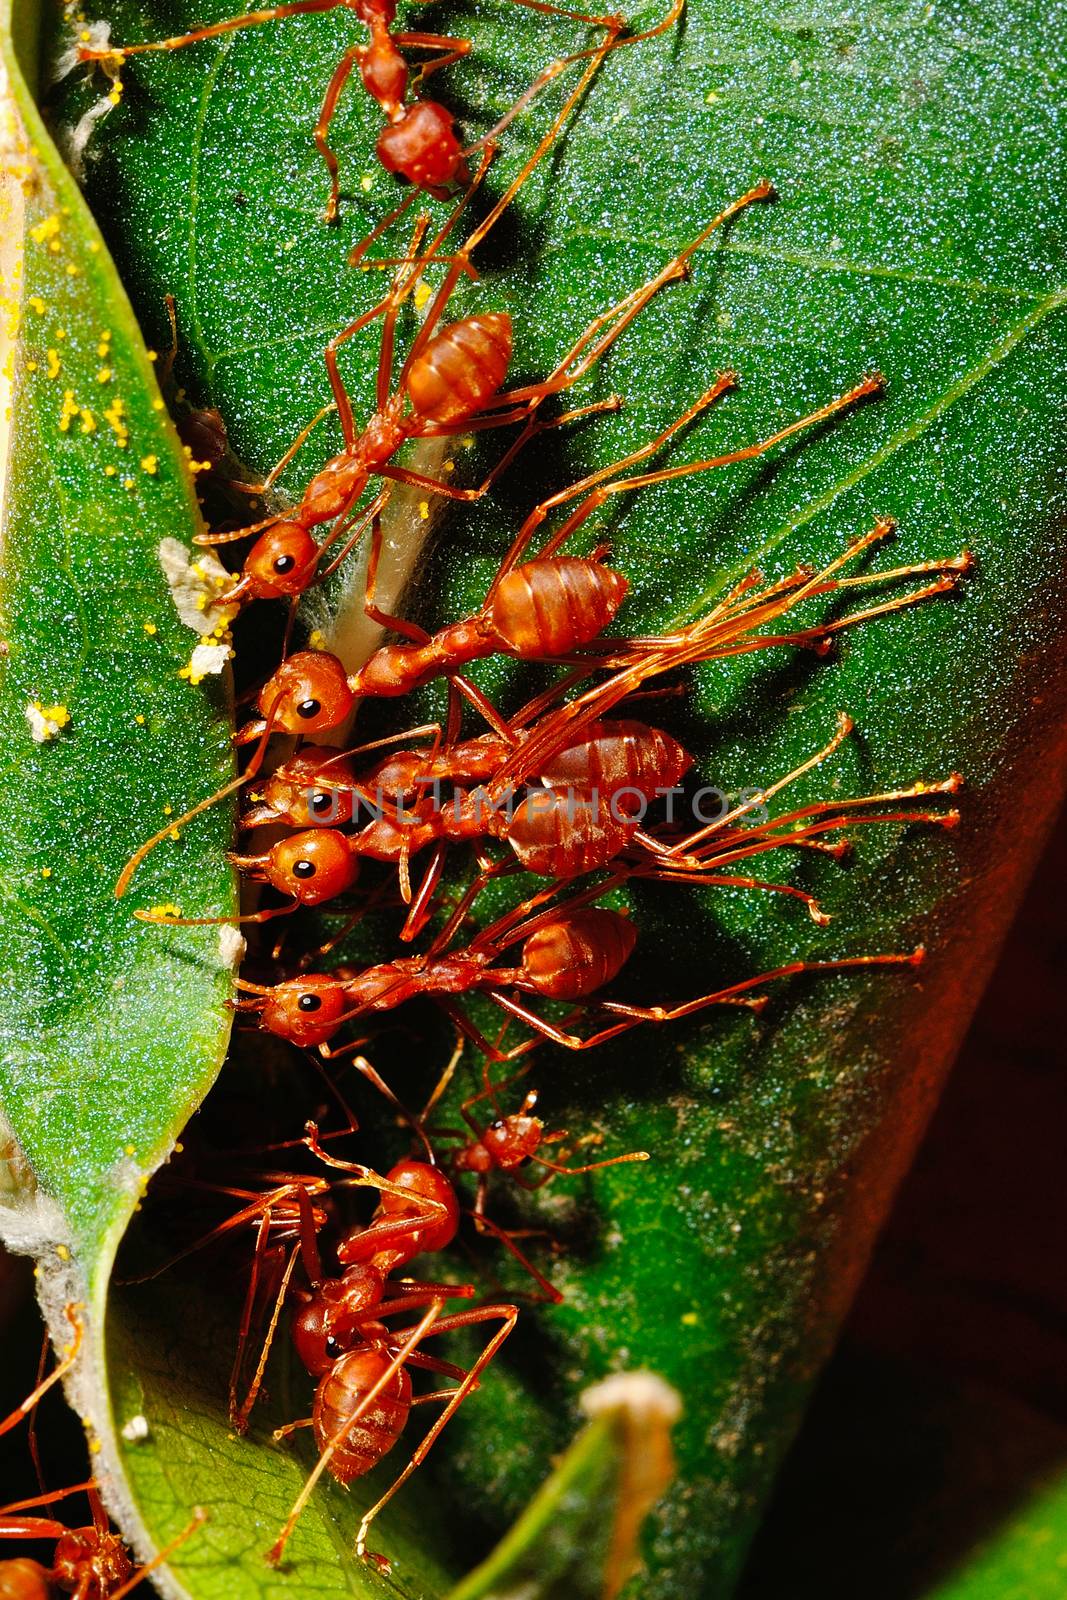 A red ant teamwork to create its resting